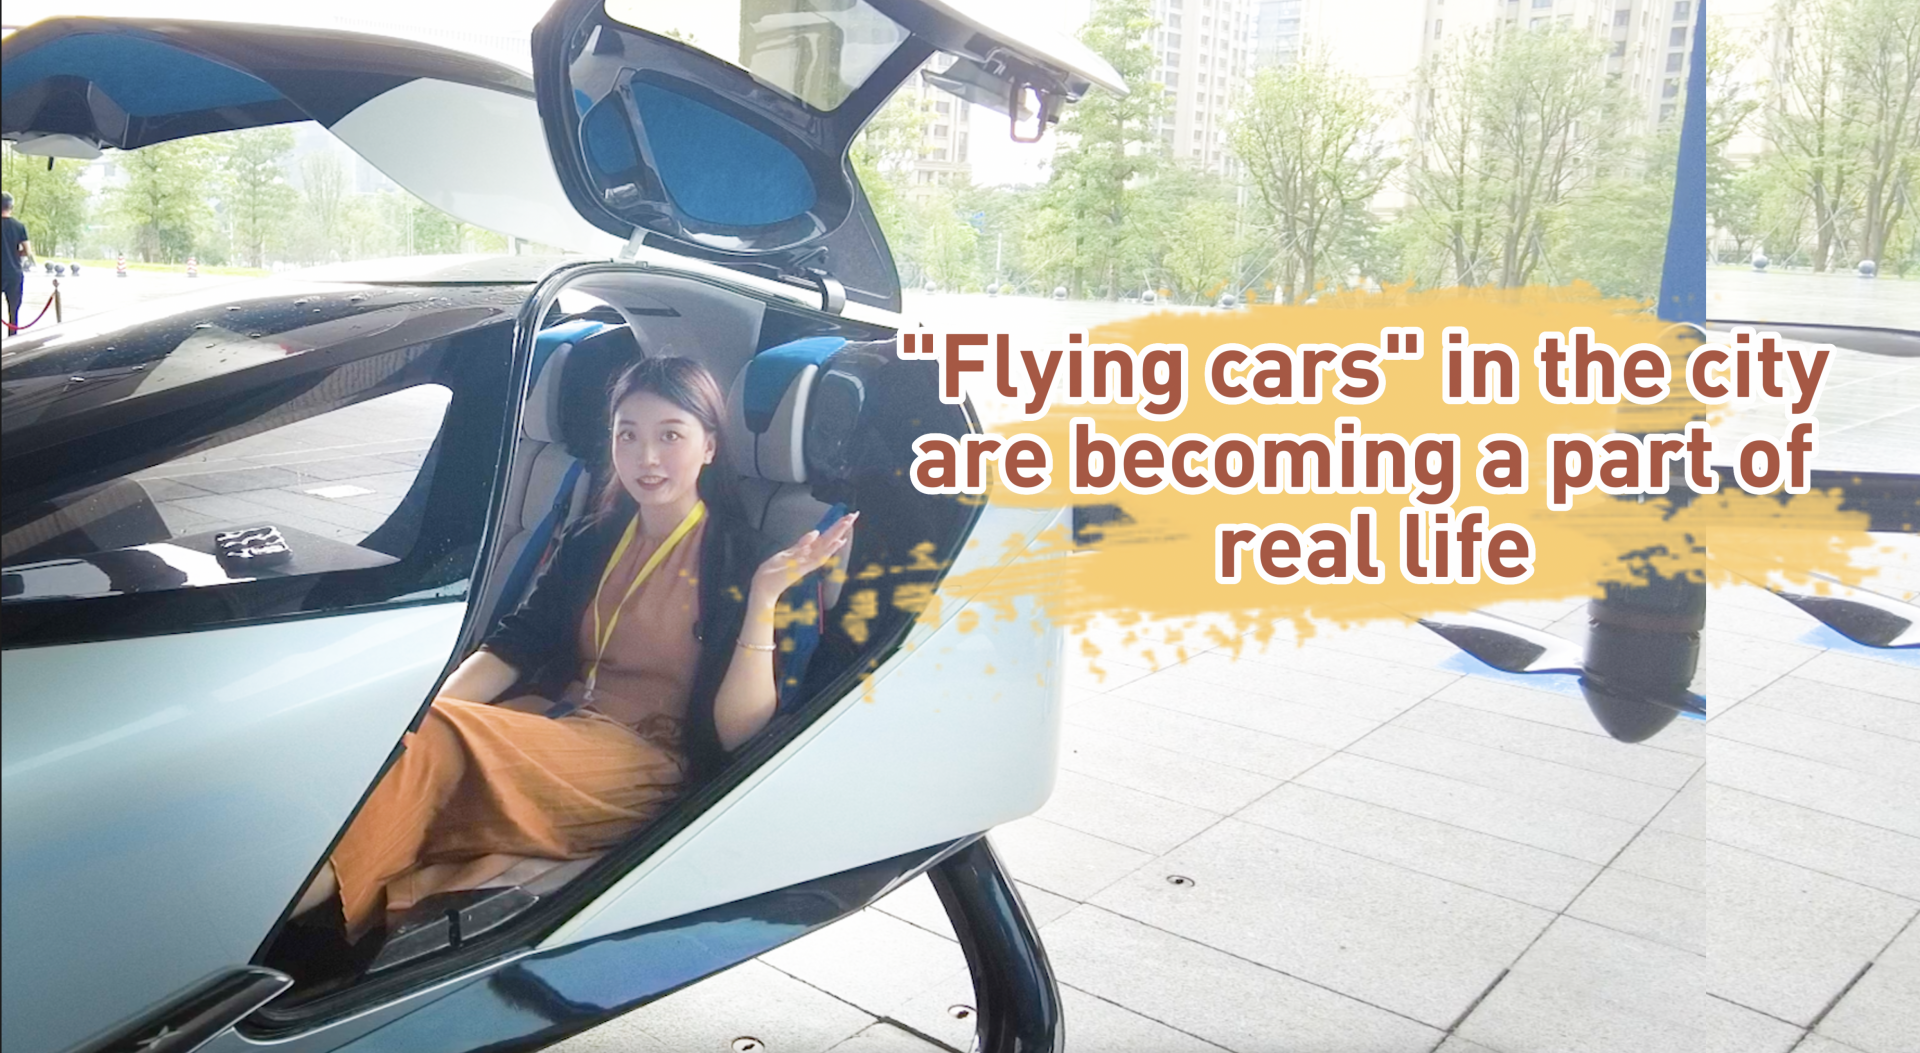 SFC Markets and Finance | "Flying cars" in the city are becoming a part of real life